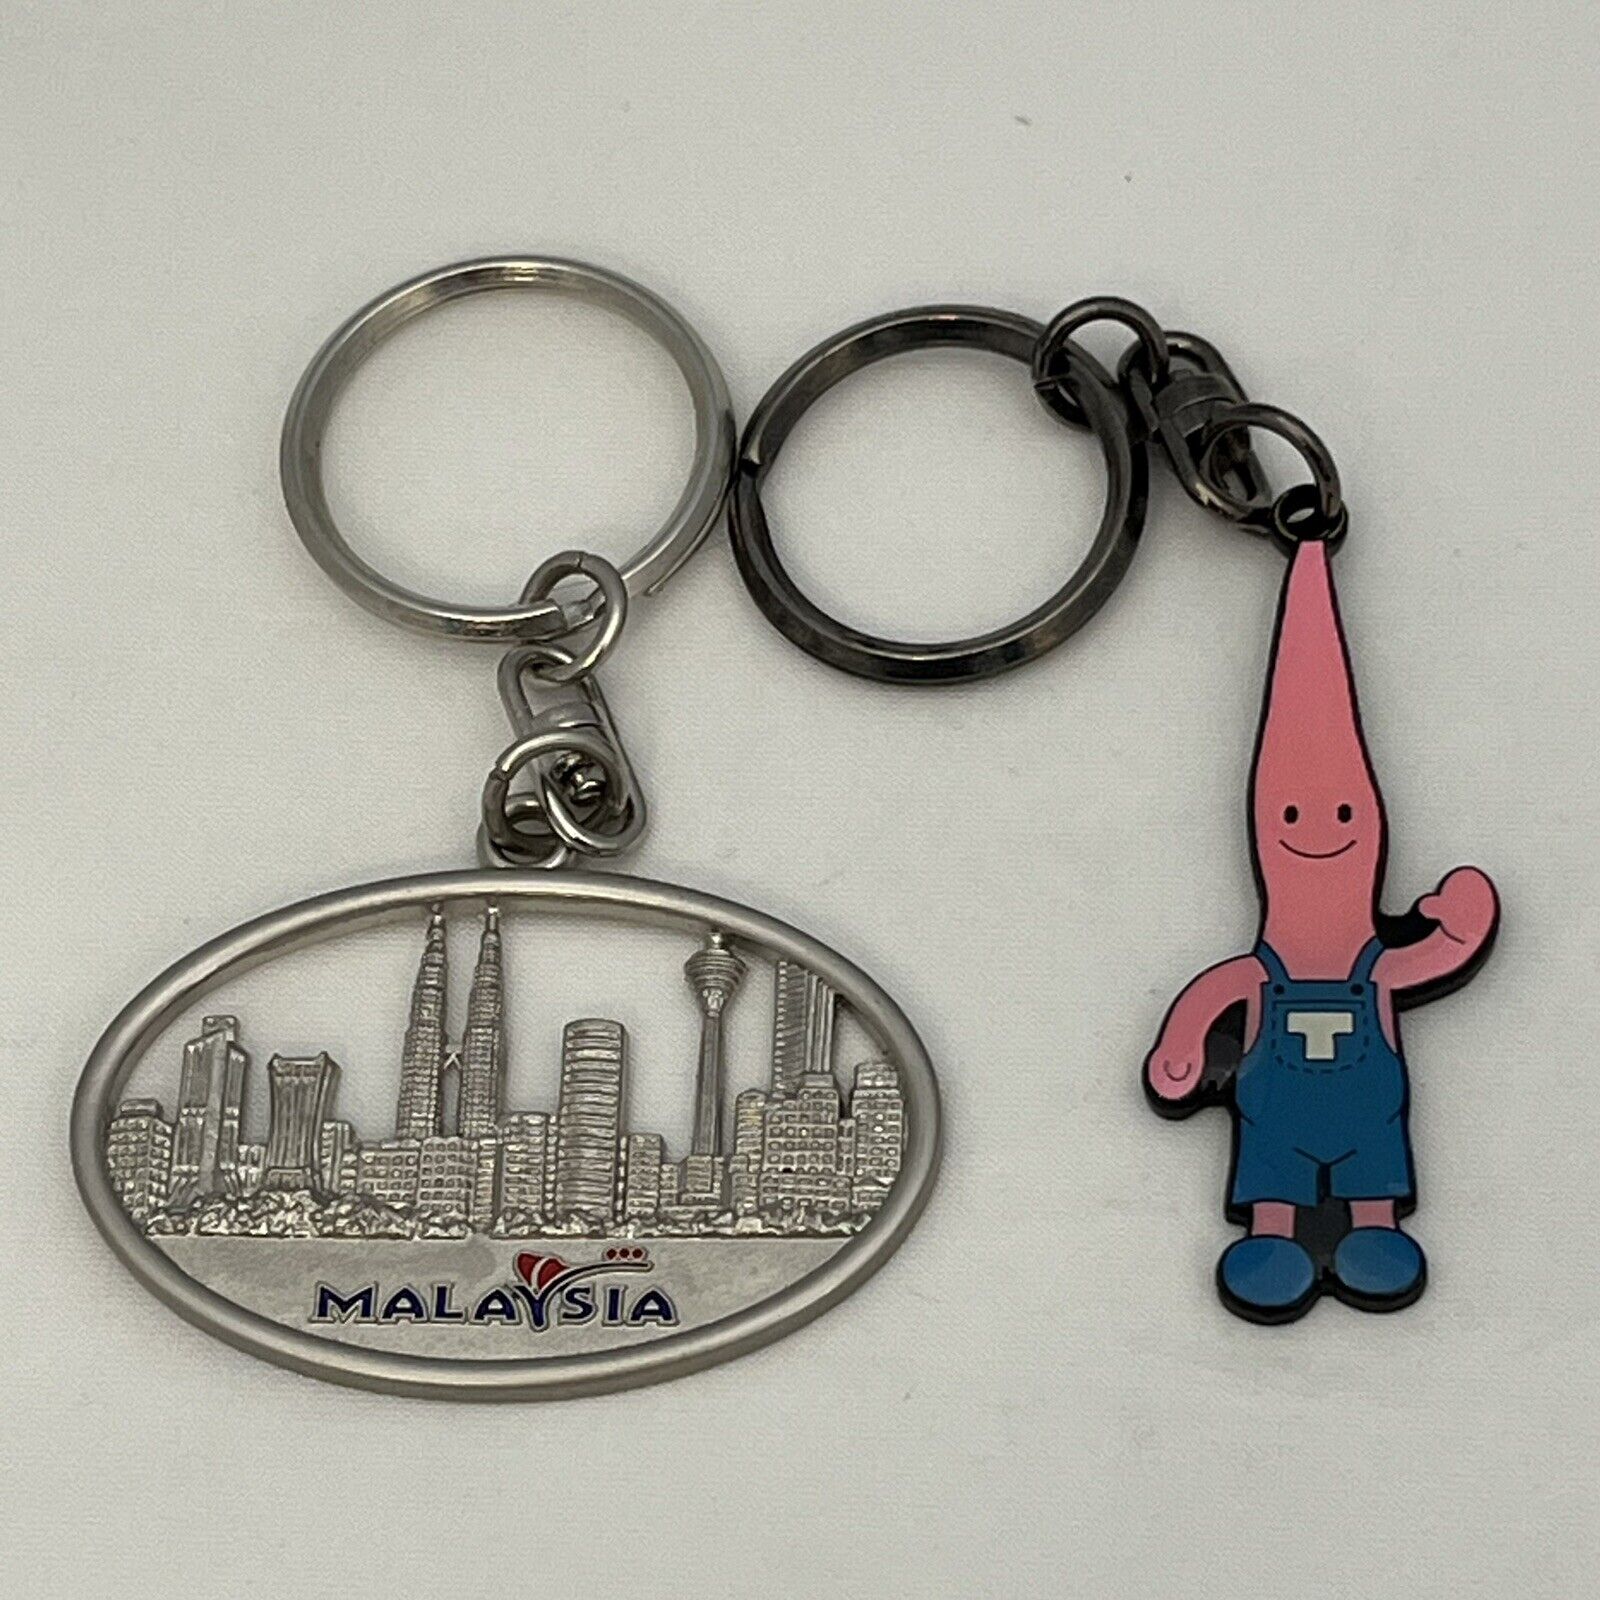 2 Vintage Metal Souvenir Asian Keychains Nappon Brother Tokyo Tower Malaysia